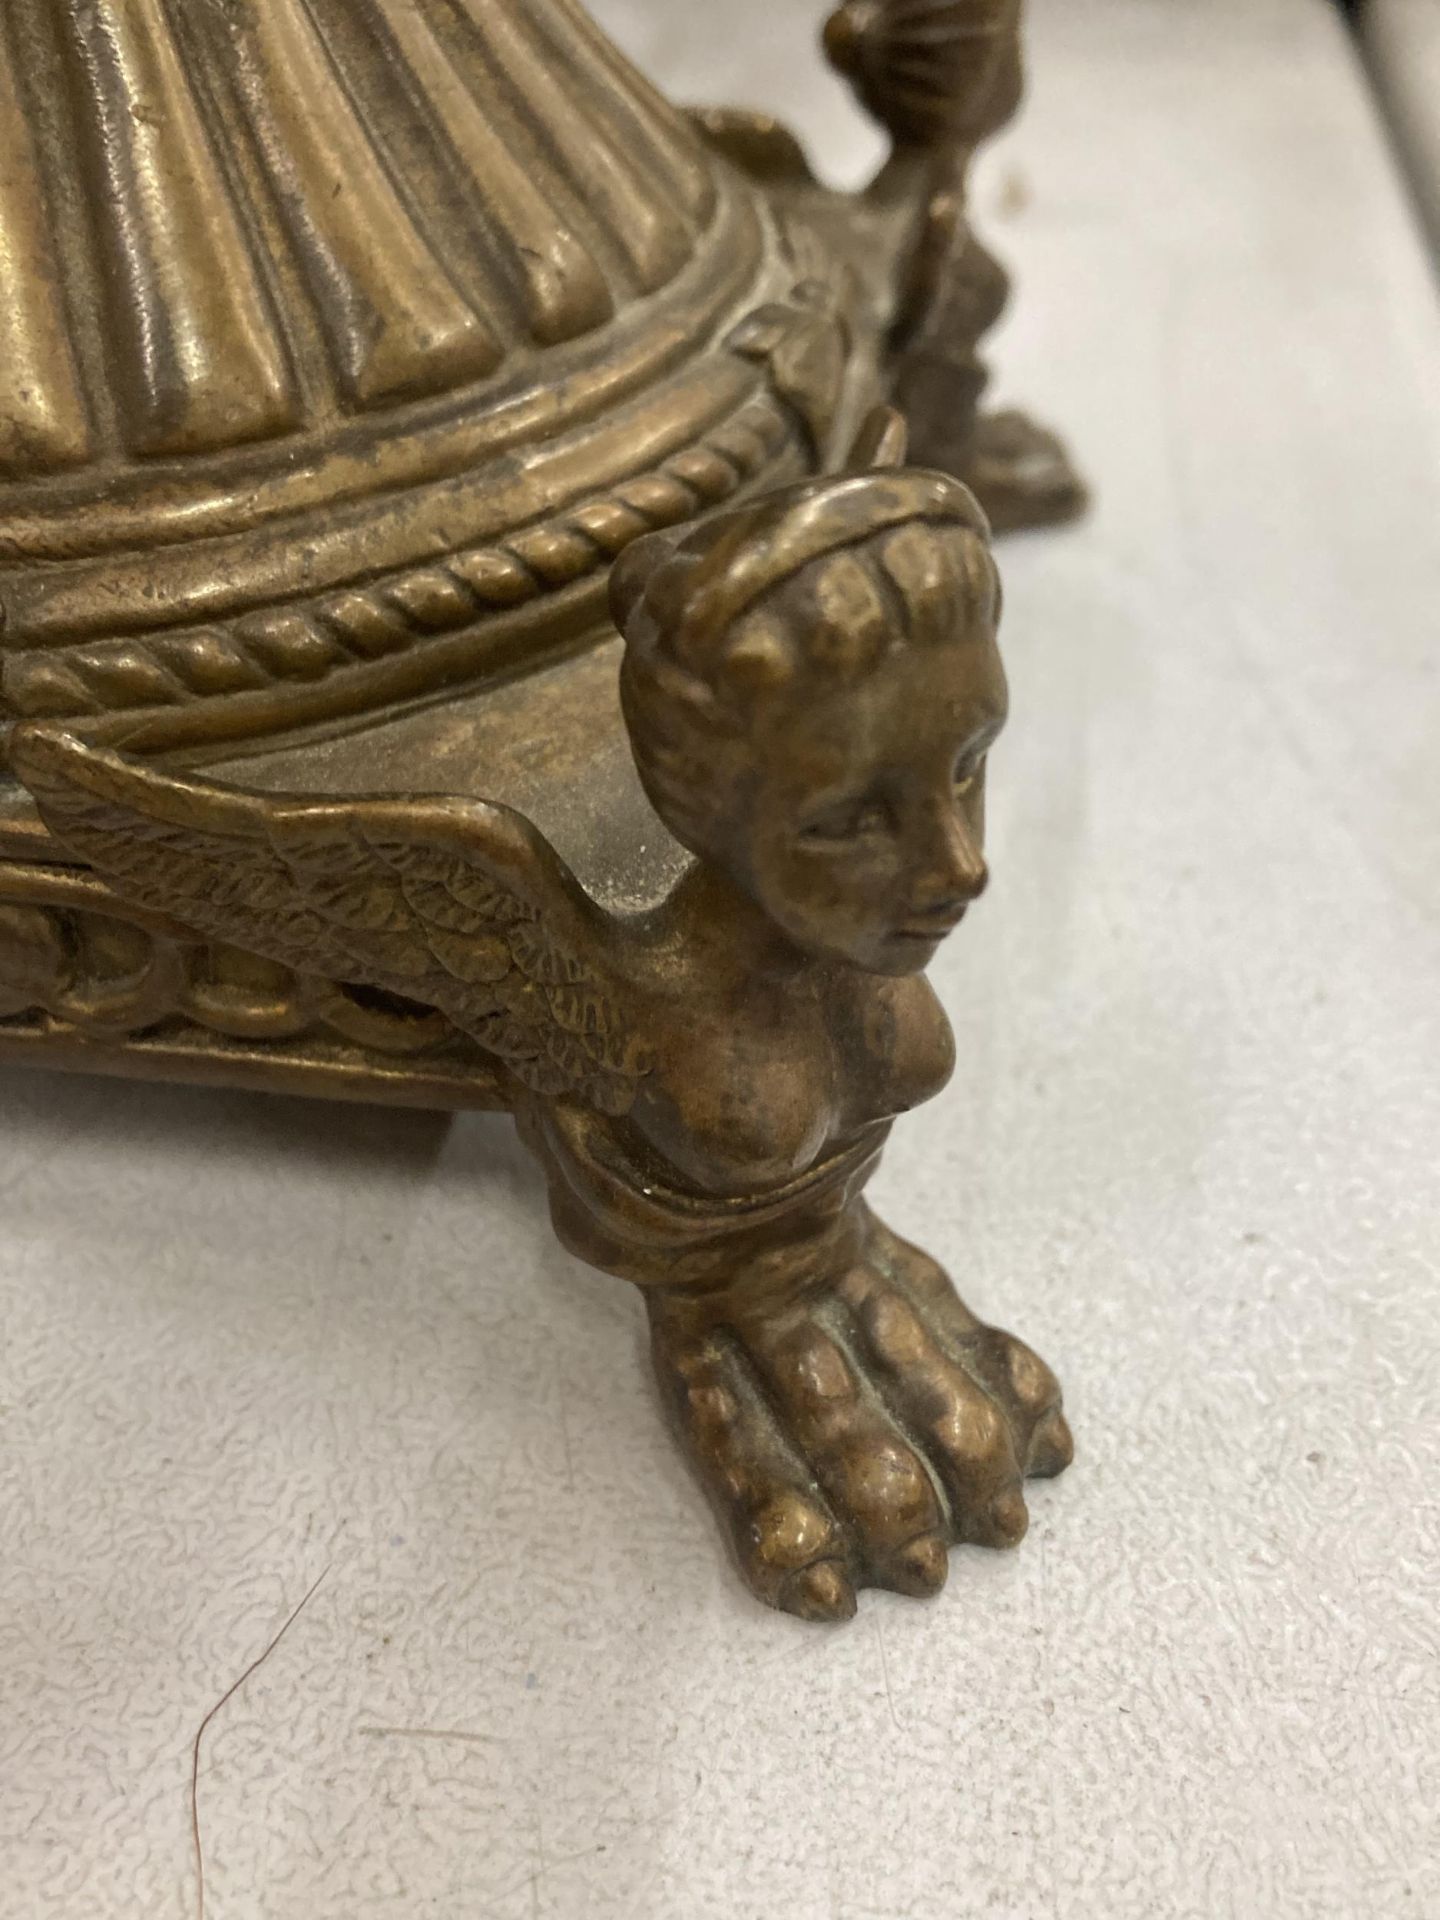 A VINTAGE CERAMIC AND BRASS MOUNTED PEDESTAL URN VASE WITH PAW FEET BASE AND GIRL MASK HANDLE DESIGN - Image 5 of 6